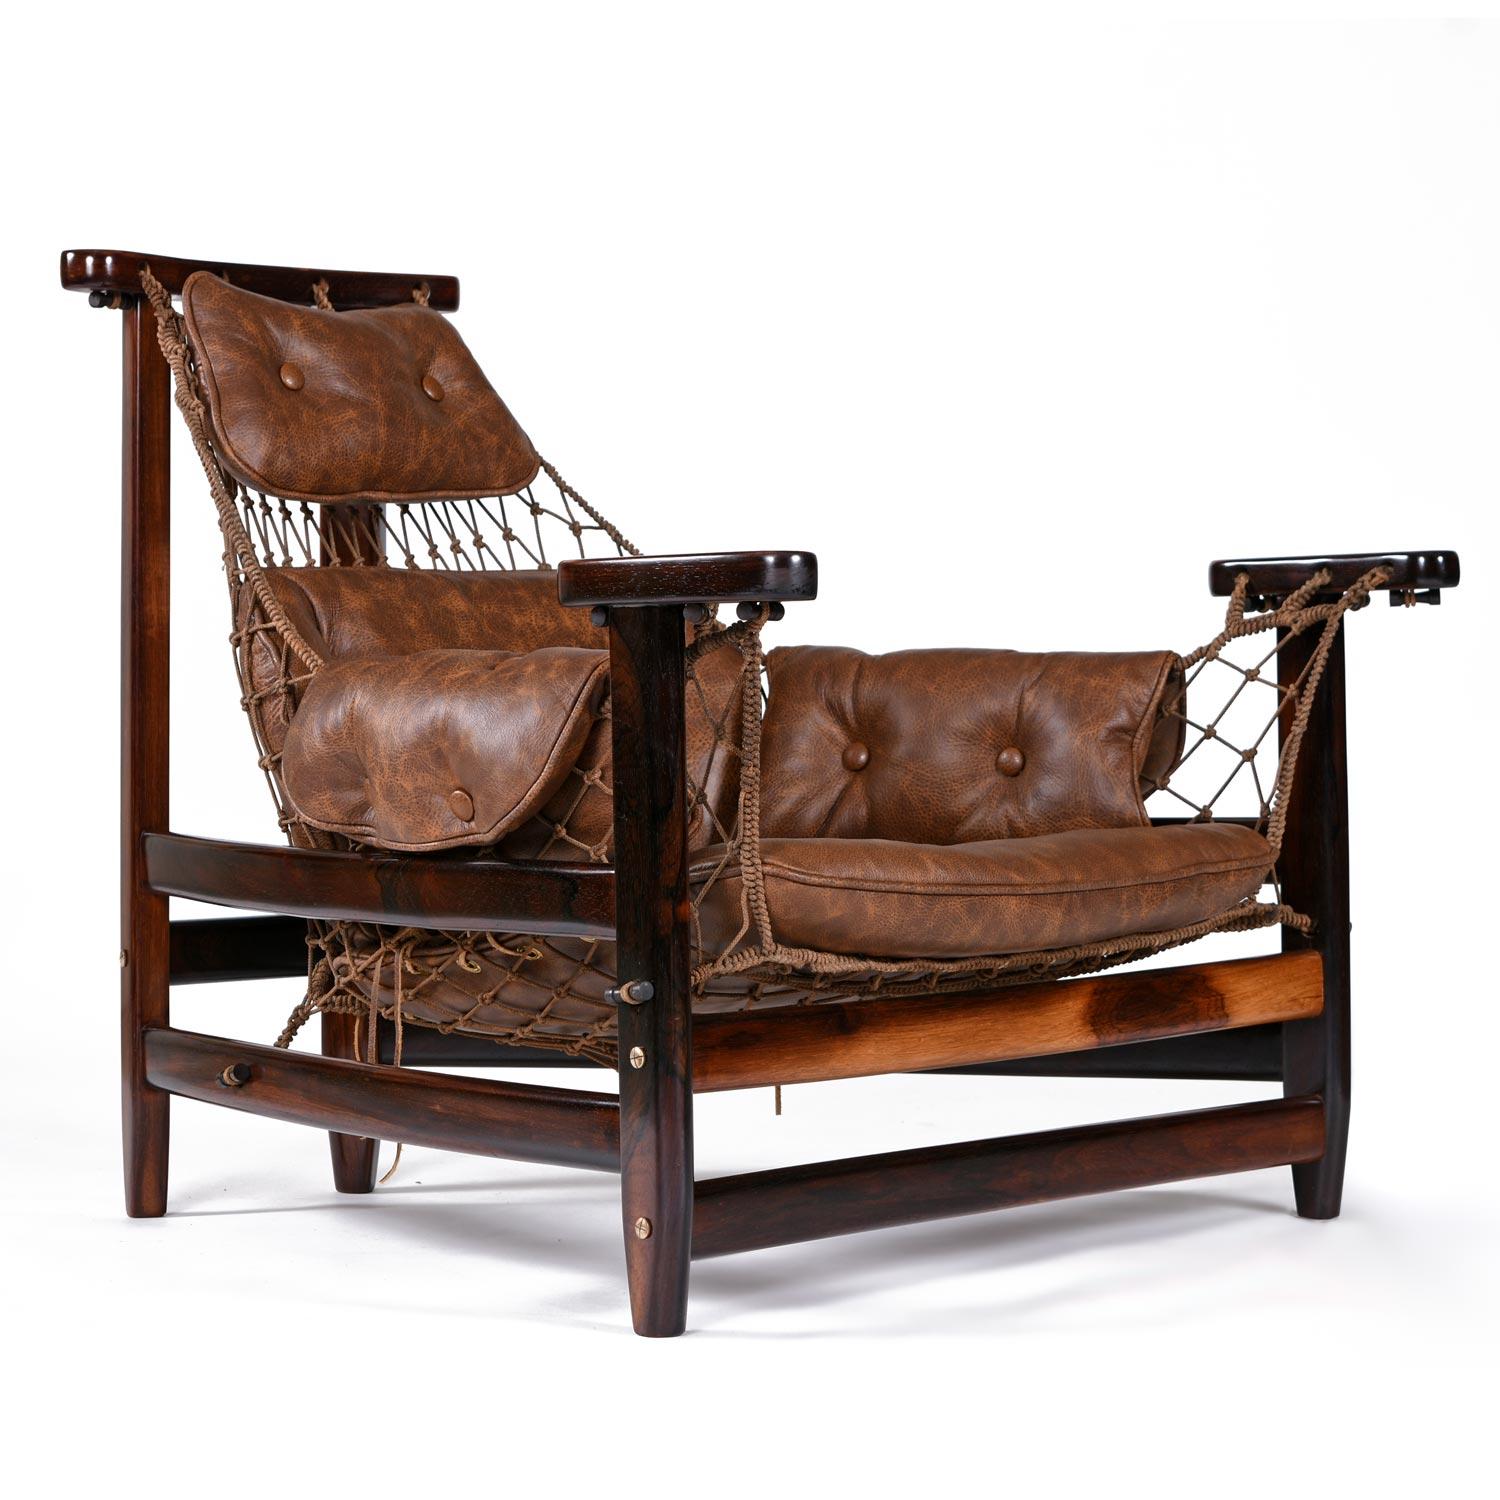 Mid-20th Century Brazilian Jangada Rosewood & Leather Sling Chair with Ottoman by Jean Gillon  For Sale